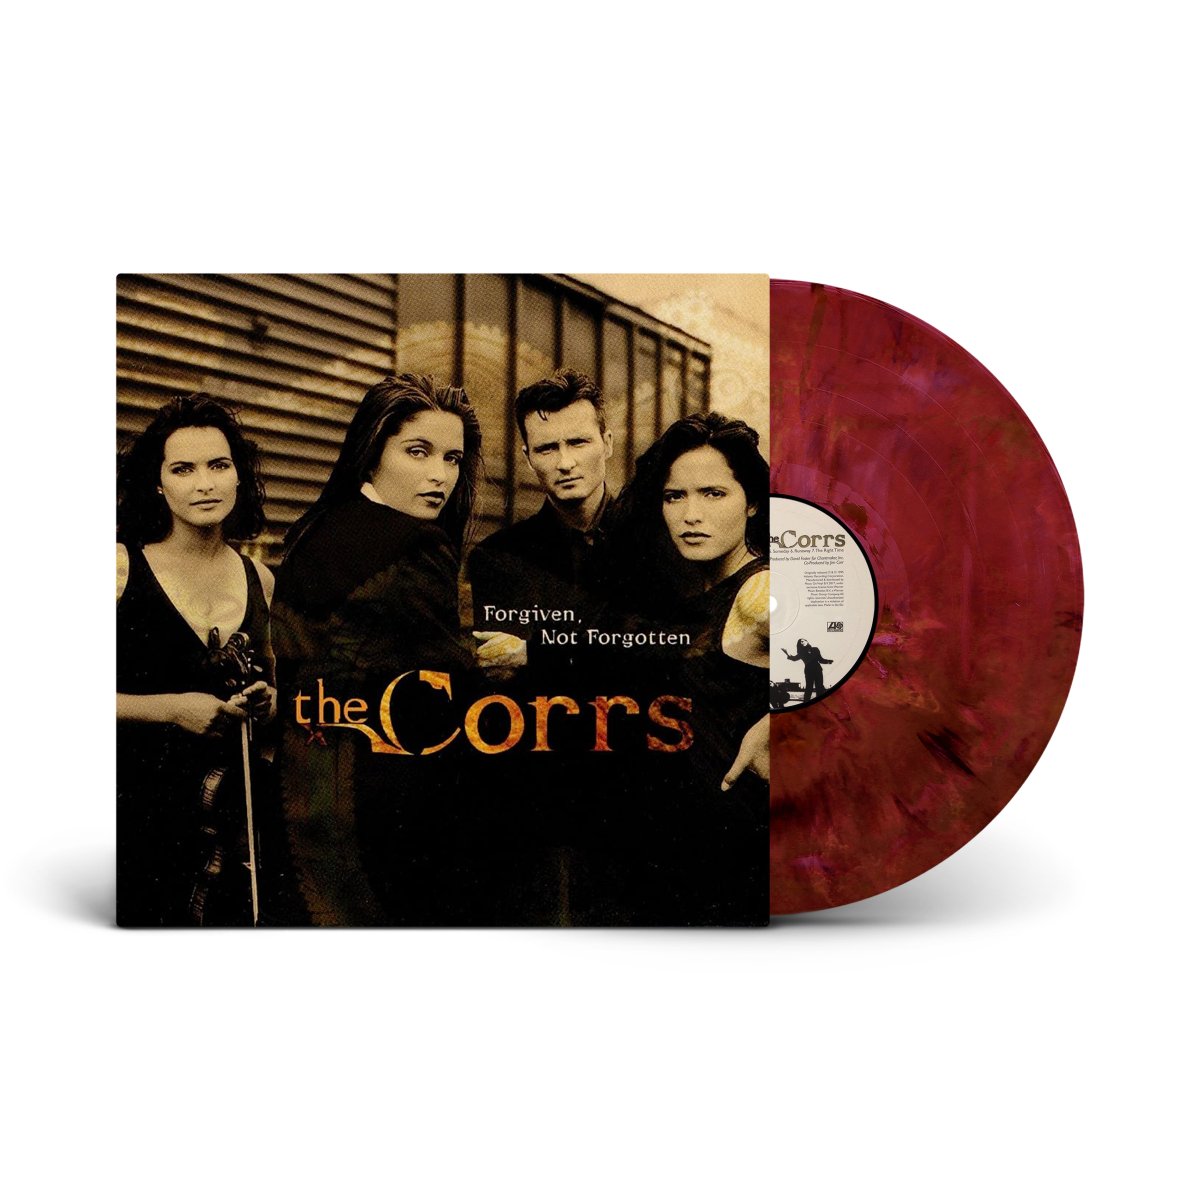 We're so excited to announce that we'll be releasing 'Forgiven, Not Forgotten' for the first time ever on recycled coloured vinyl for @AlbumDayUK ! Each vinyl will be unique with its own colour combination. Out 14th October, pre-order now TheCorrs.lnk.to/FNF #NationalAlbumDay